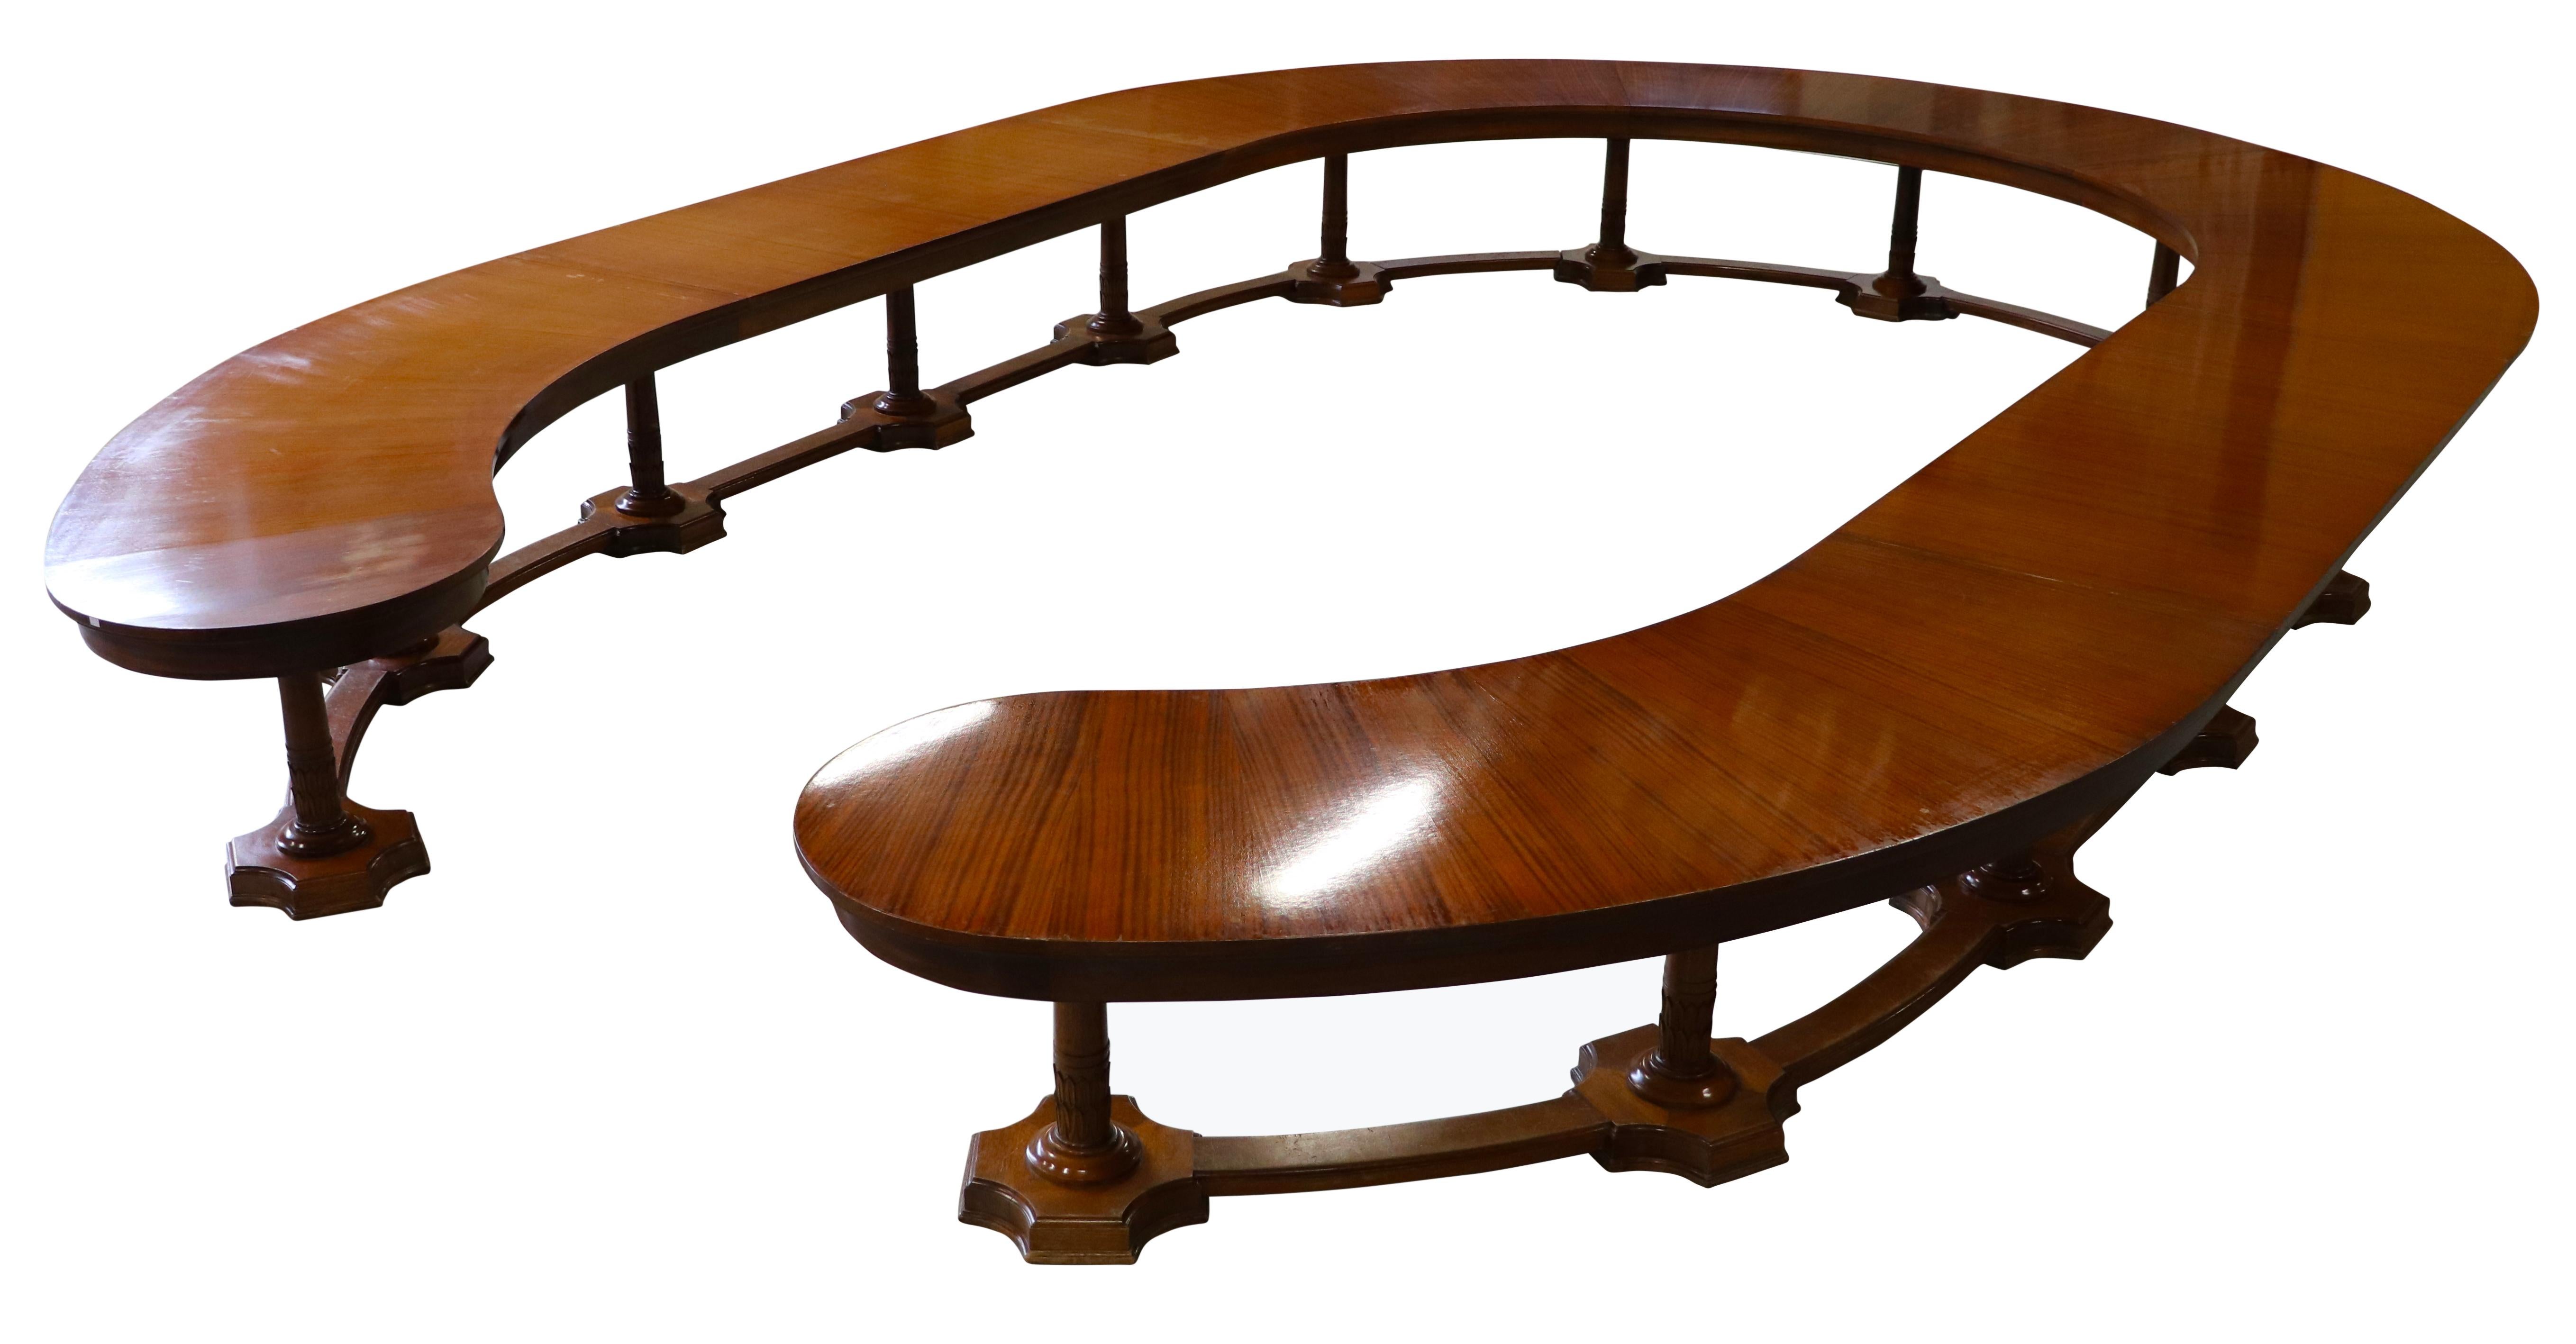 An amazing and breathtaking council table, conference table, boardroom table made in Belgium circa 1920 in the Neo-Classical style. Beautiful figured mahogany (in need of refreshing) horseshoe shaped tabletop resting on tapered columnar gun barrel